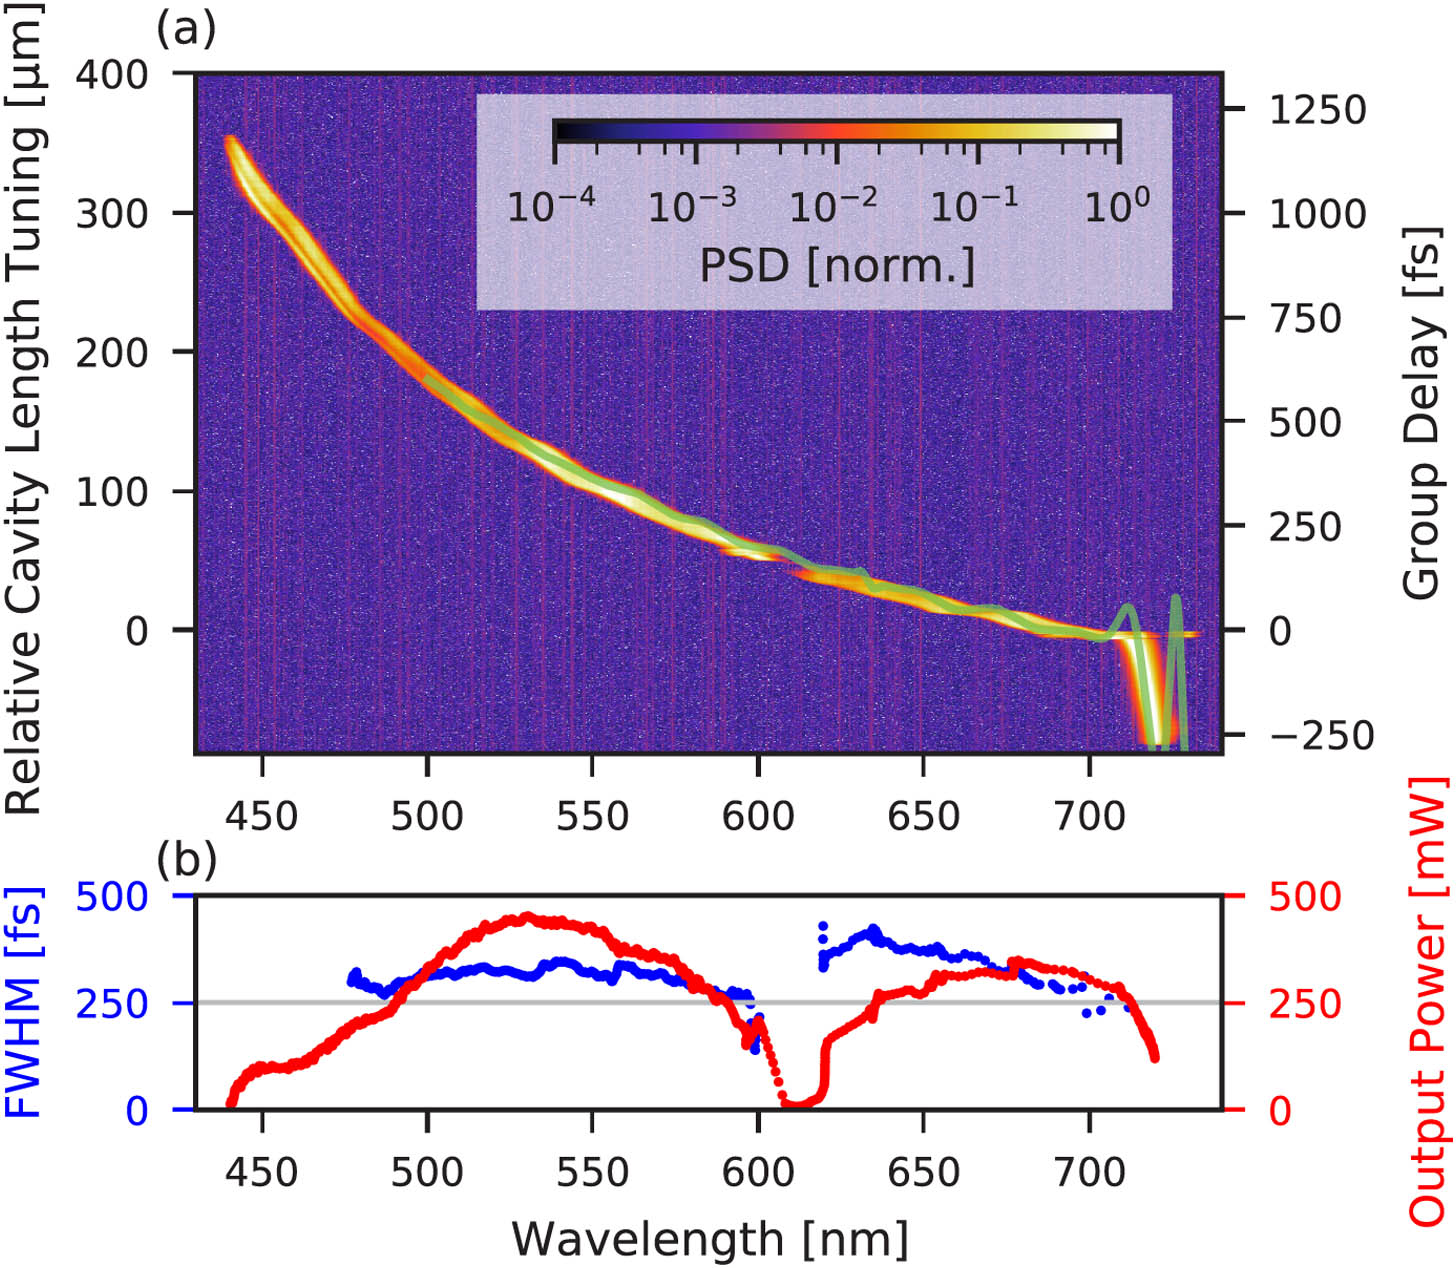 Tuning behavior of the VIS-NOPO. (a) Measured power spectral density (PSD) as a function of wavelength and cavity length/group delay. The green line indicates the calculated net intracavity GDD. (b) Measured pulse durations and output powers.